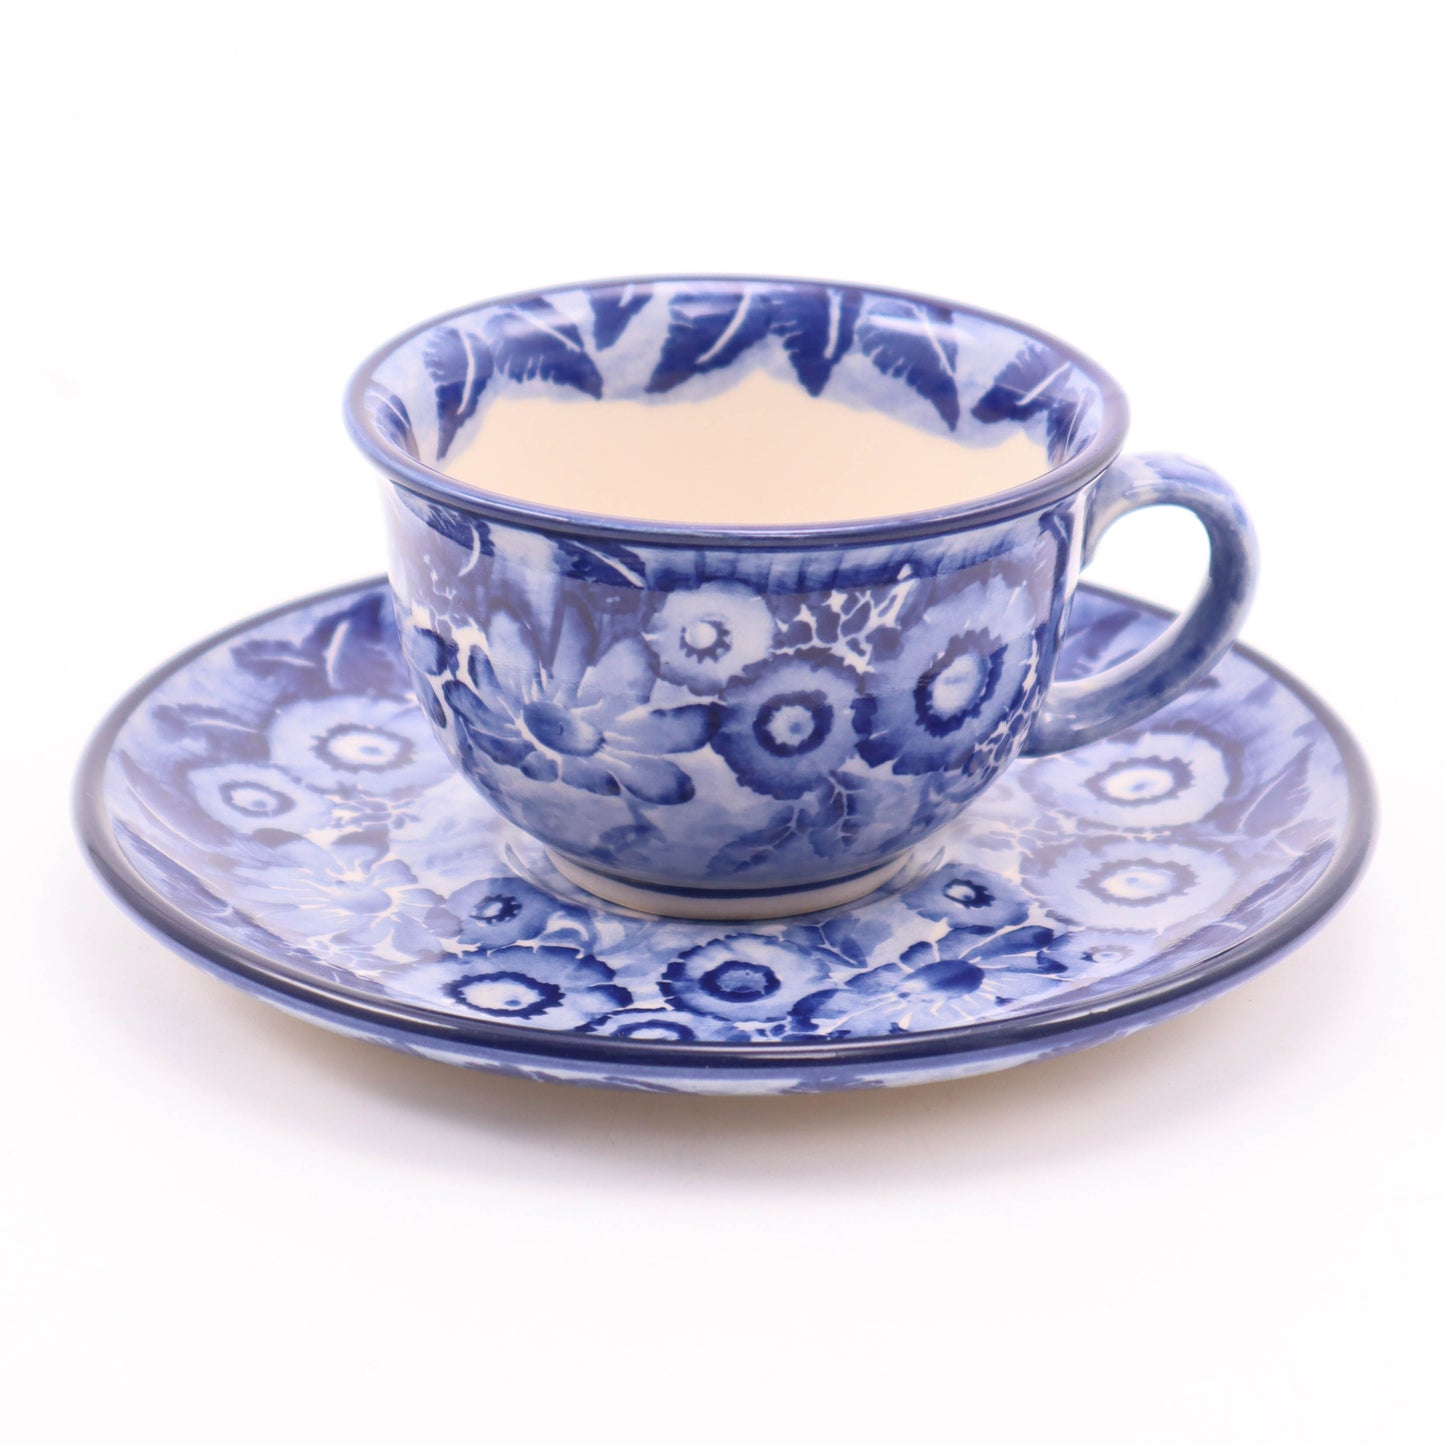 8oz Teacup and Saucer. Pattern: Watercolor Blossoms